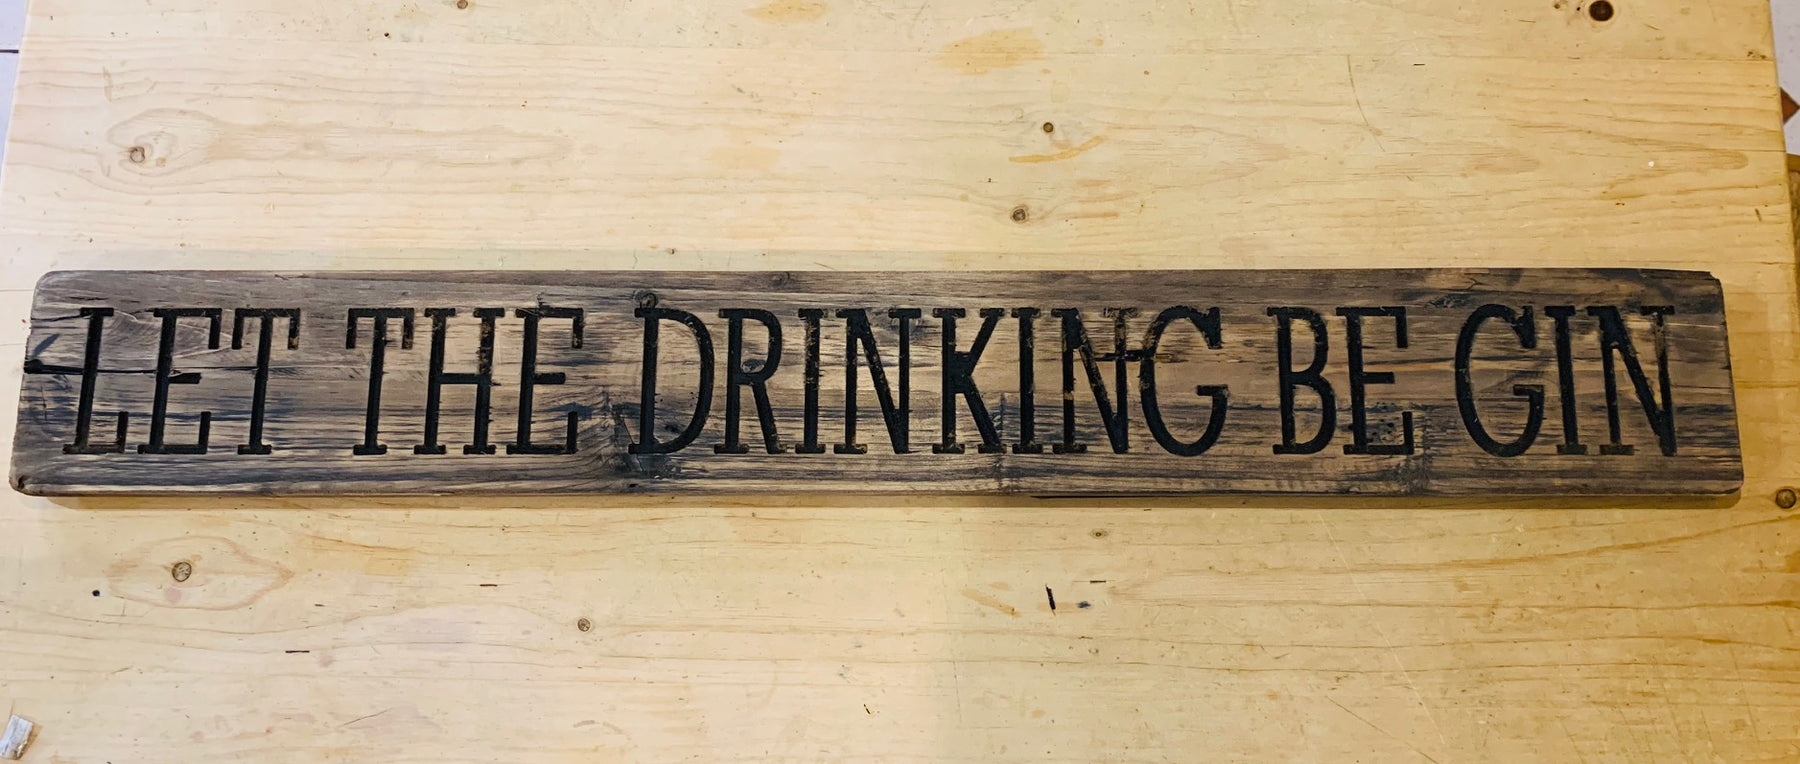 LET THE DRINKING BE-GIN - Rustic Wooden Message Plaque